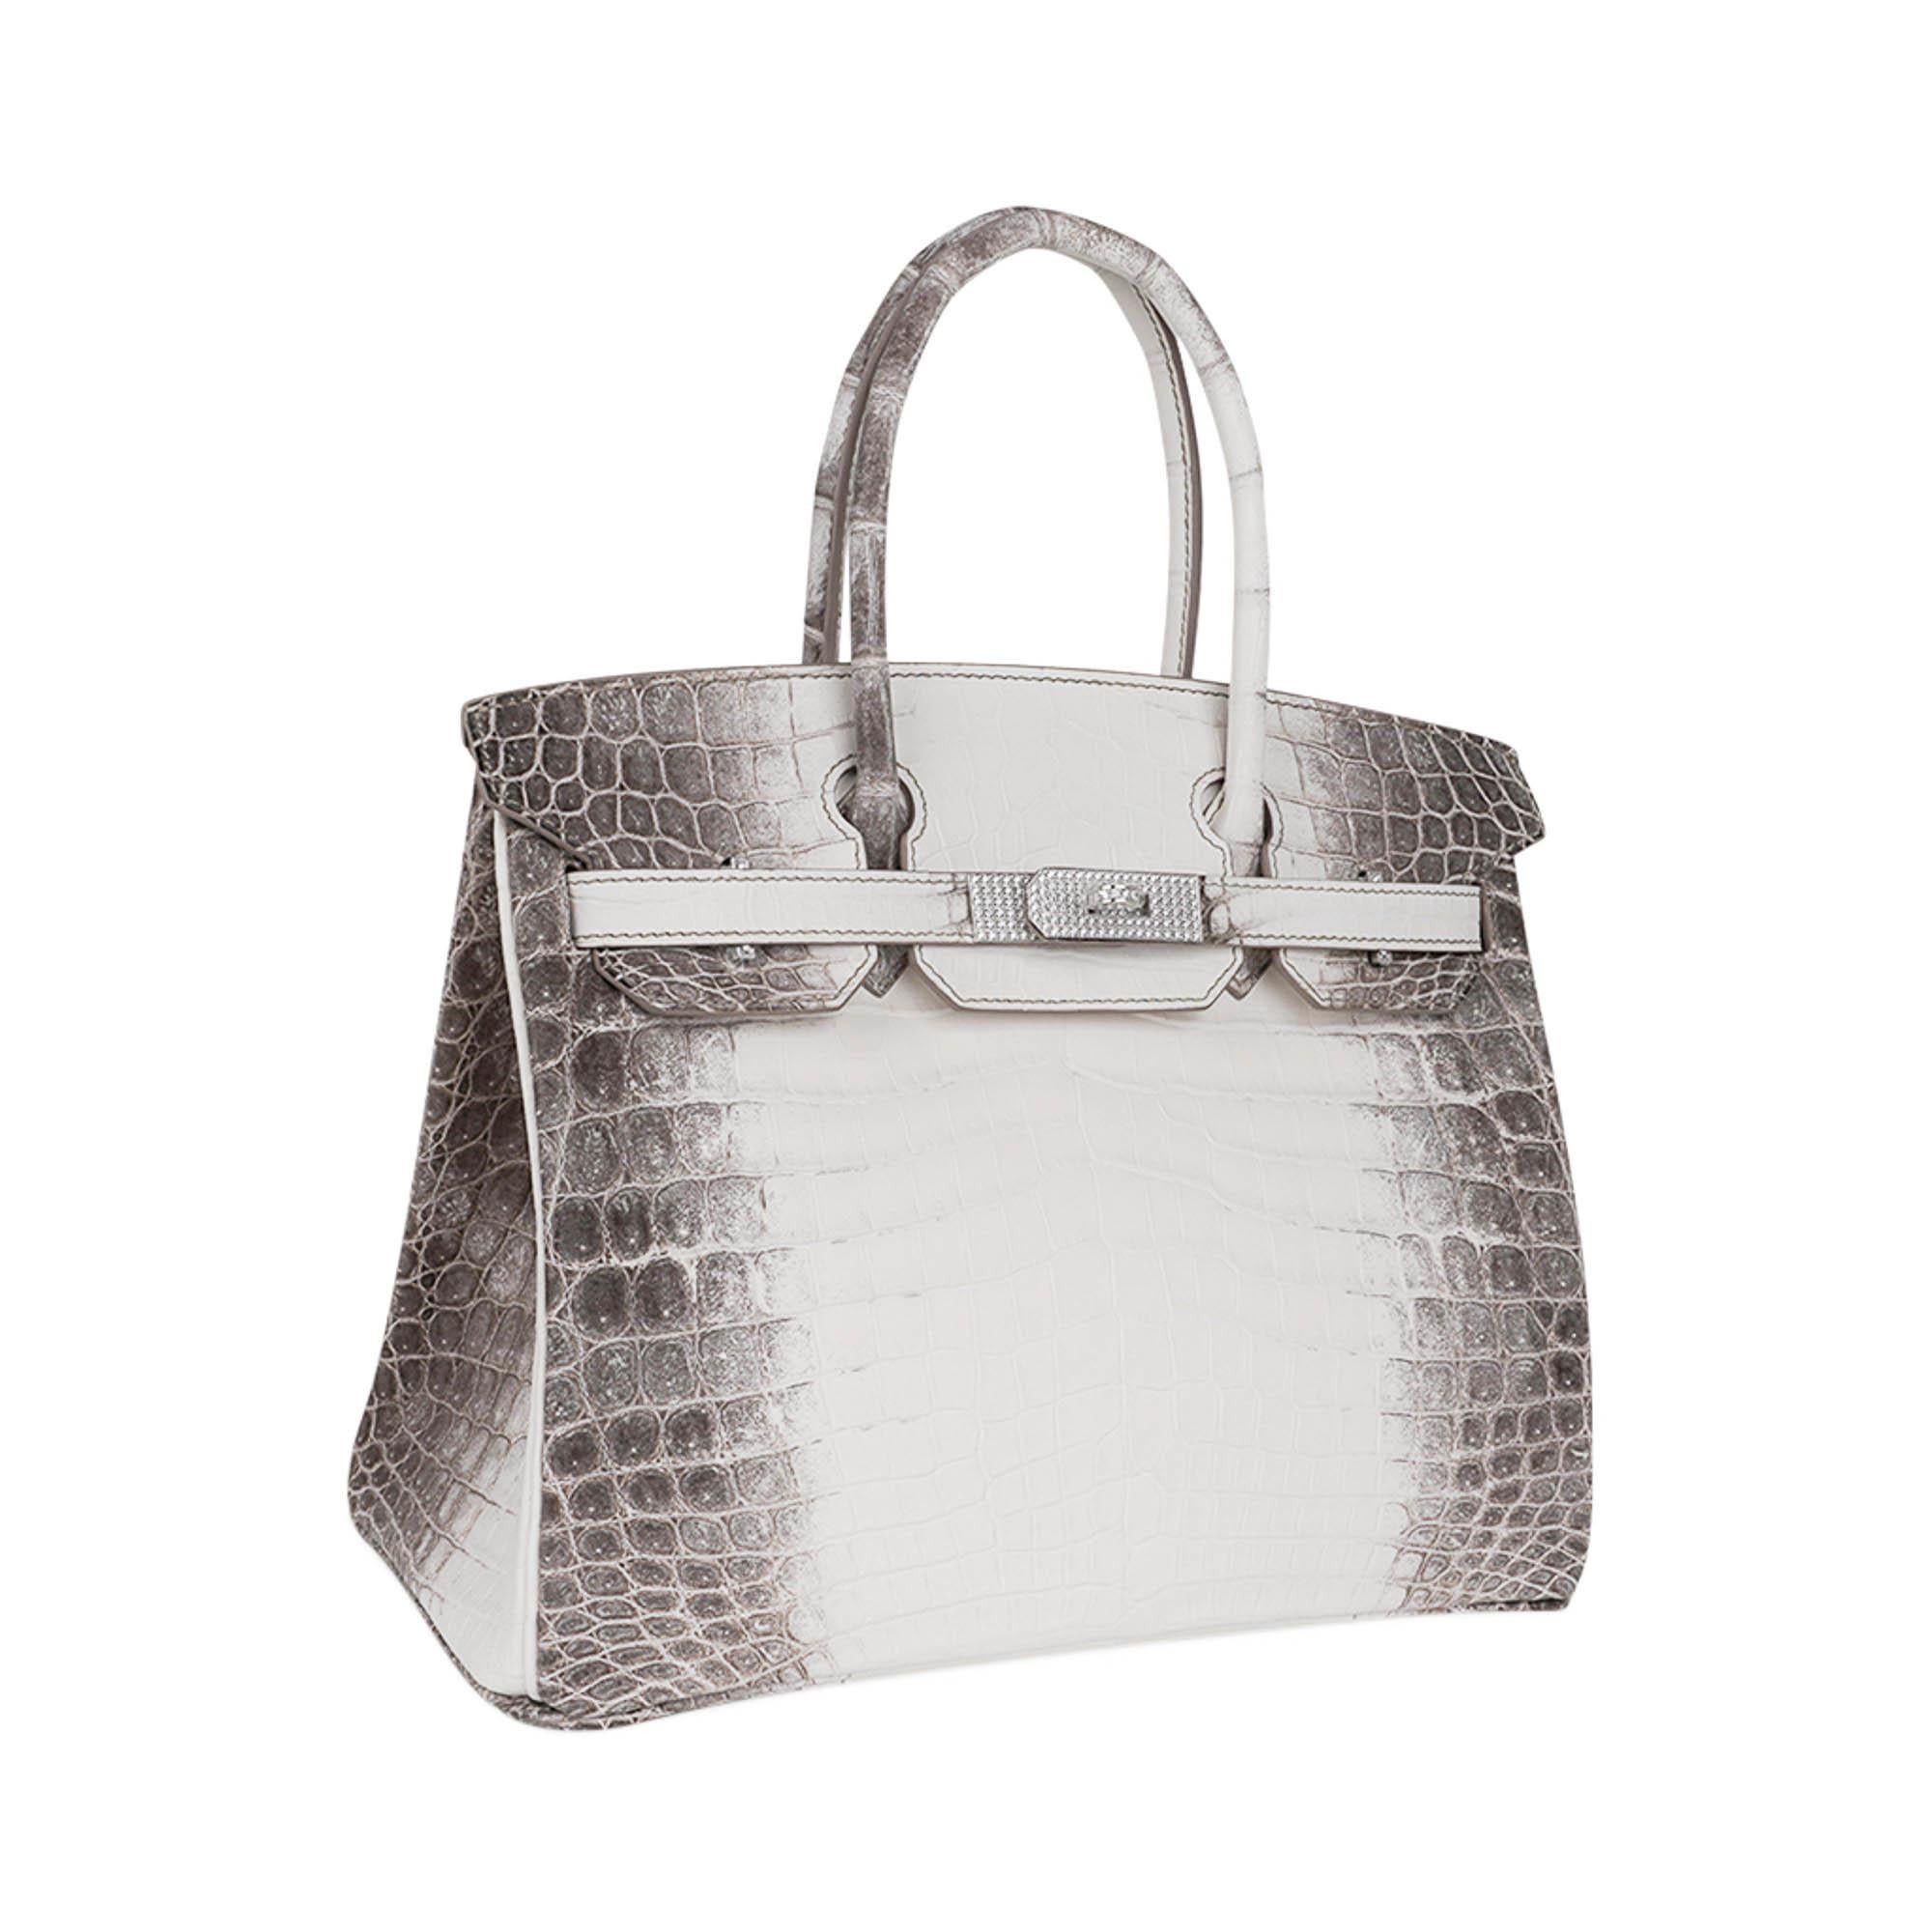 Mightychic offers an exceptional Hermes Birkin 30 Diamond Blanc Himalaya Matte Crocodile.
Exquisite coloration and details, this rare and coveted bag is becoming more elusive and difficult to find.
18K White Gold hardware set with 245